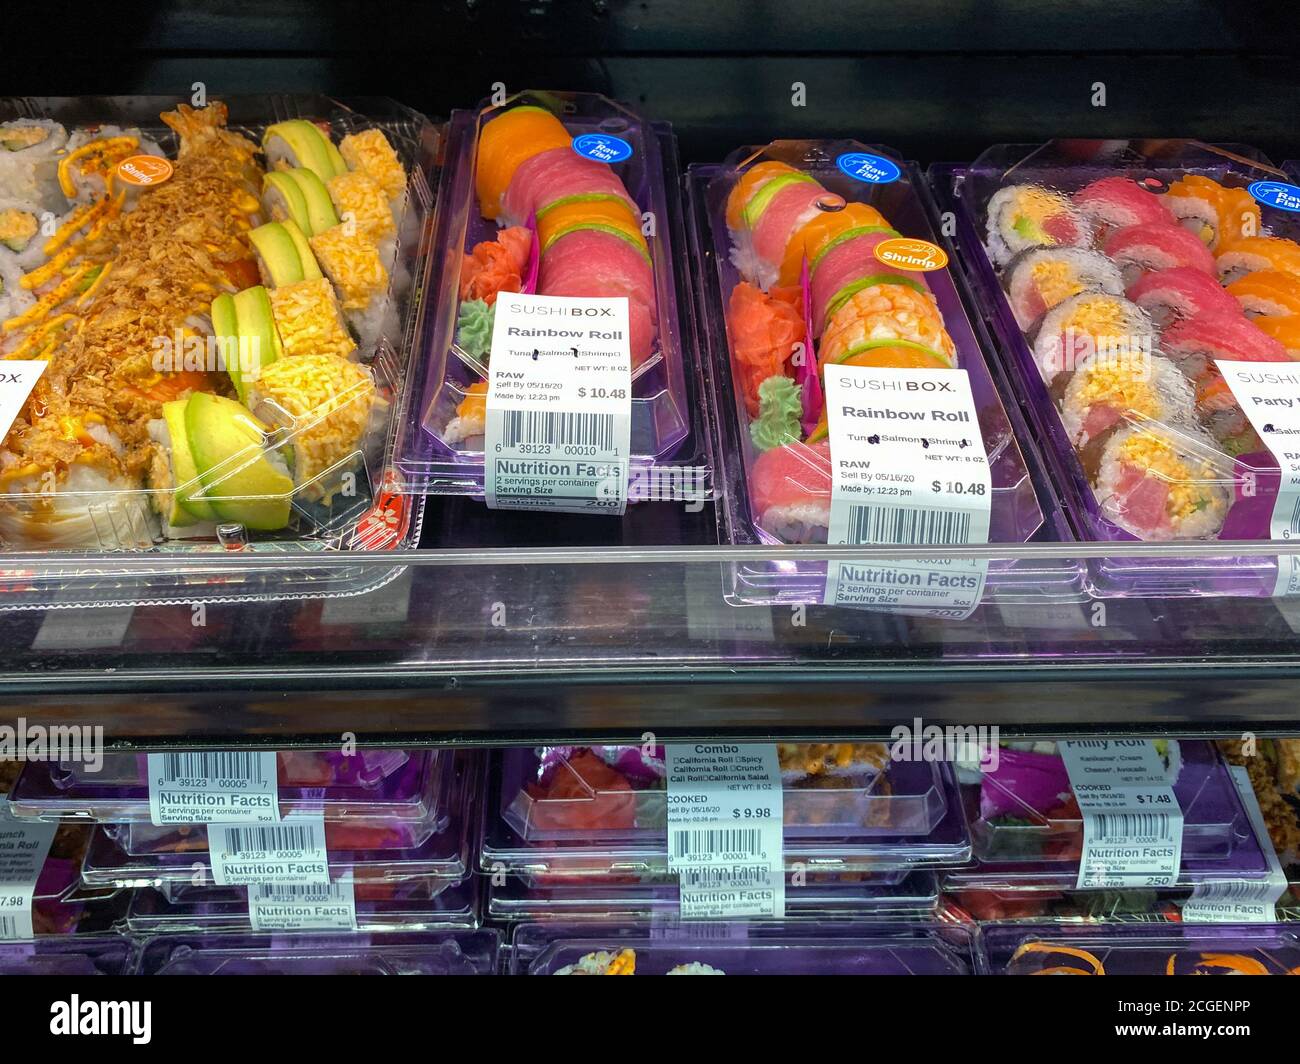 Orlando,FL/USA -5/15/20: Fresh and handmade Sushi in the refridgerated  aisle of a Sams Club grocery store ready to be purchased by consumers Stock  Photo - Alamy